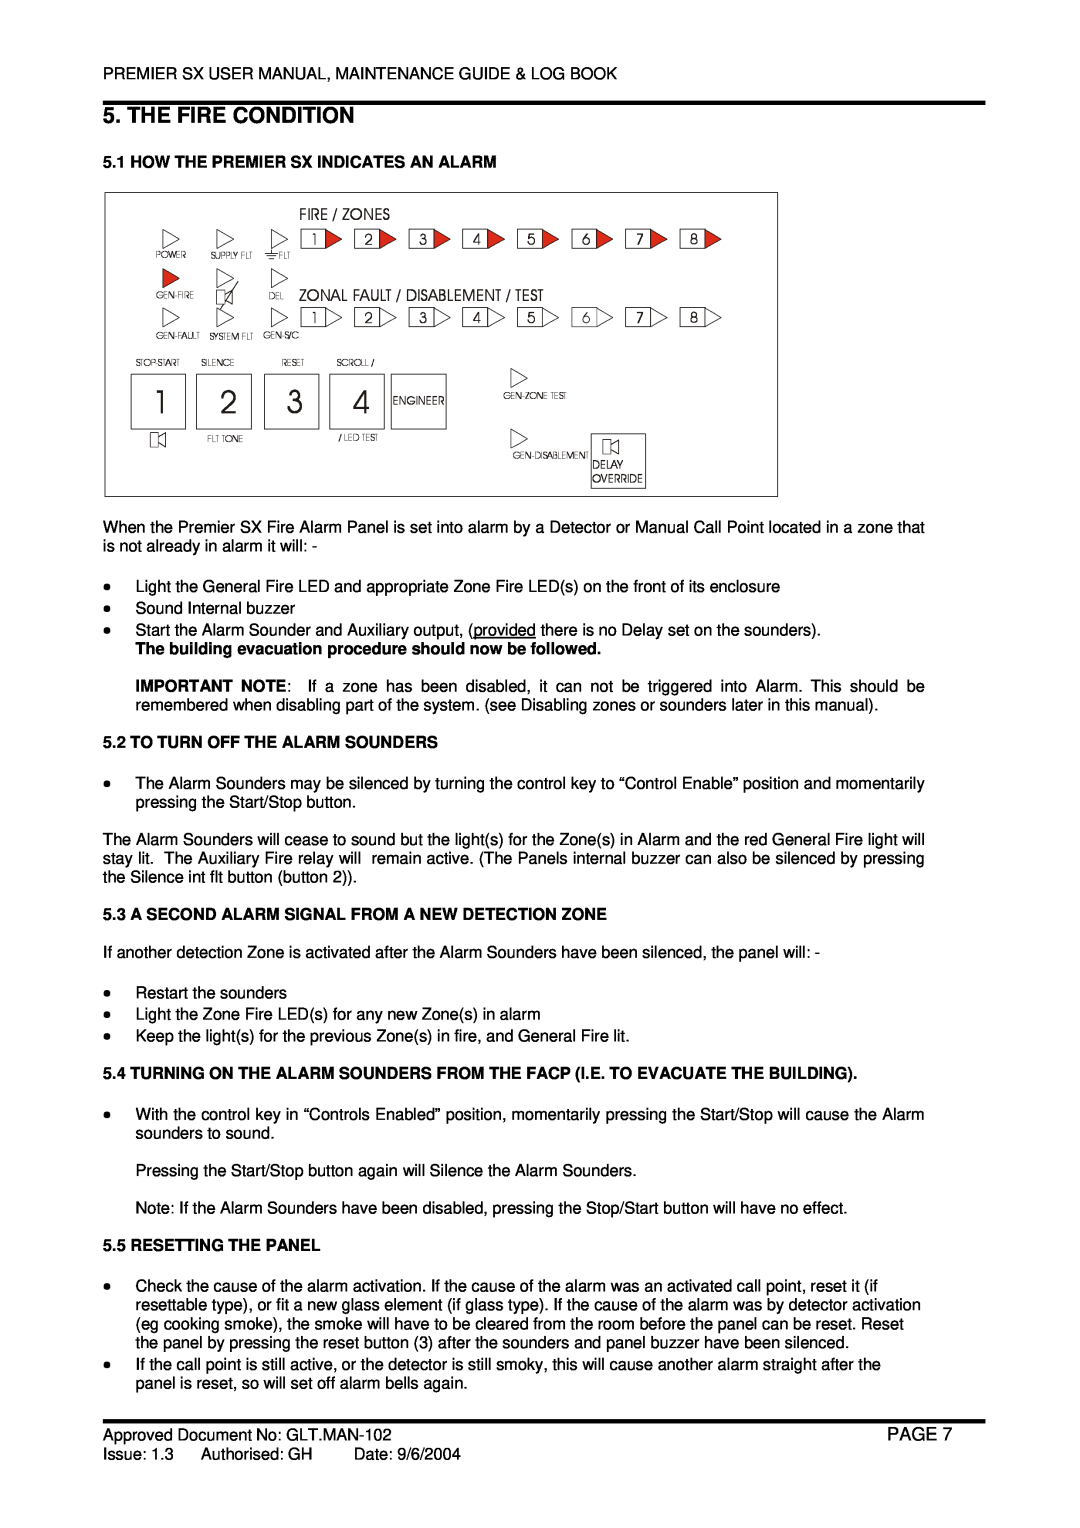 Premier Fire Alarm Control Panel user manual The Fire Condition, Page, To Turn Off The Alarm Sounders, Resetting The Panel 